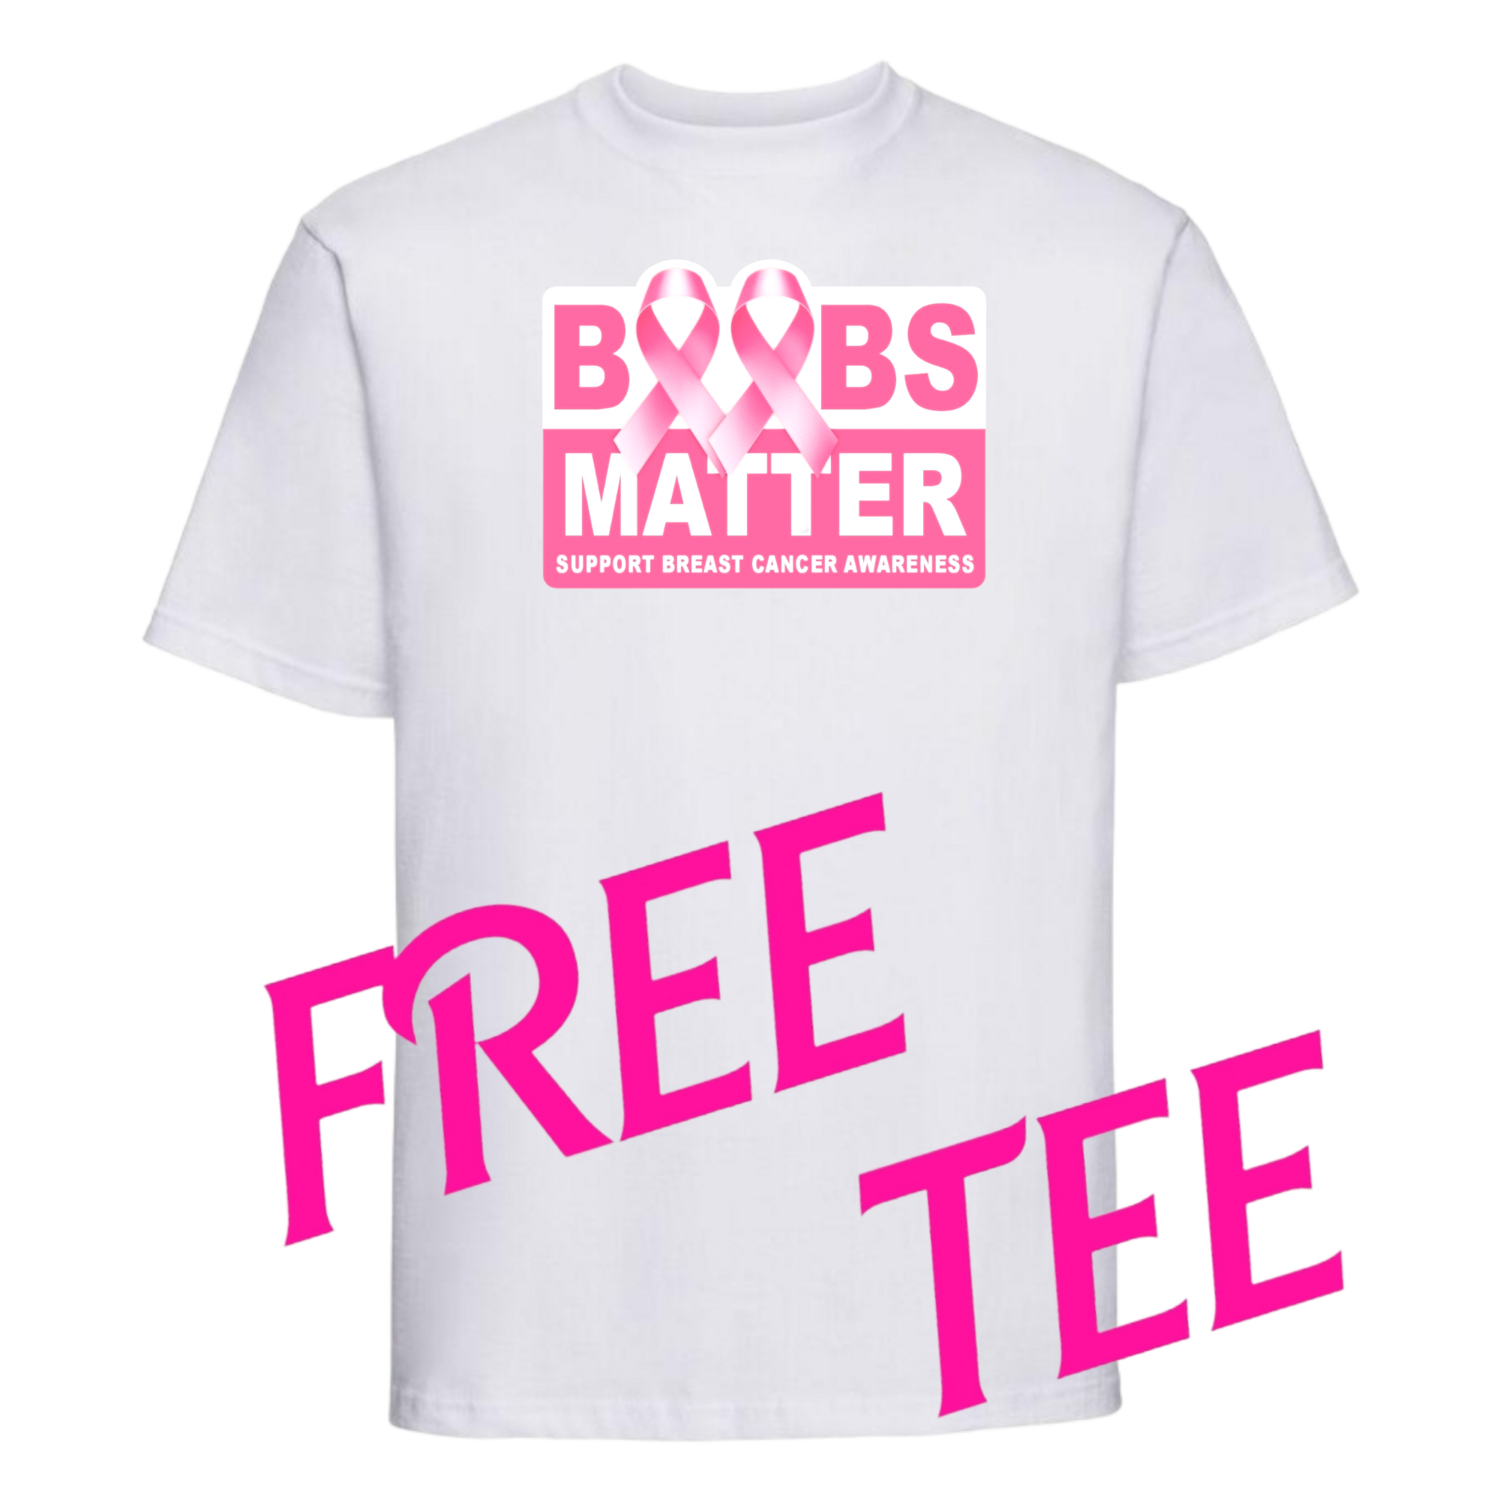 FREE tee BREAST CANCER AWARENESS boobs mater
Only small to xl is free anything bigger is a lil extra